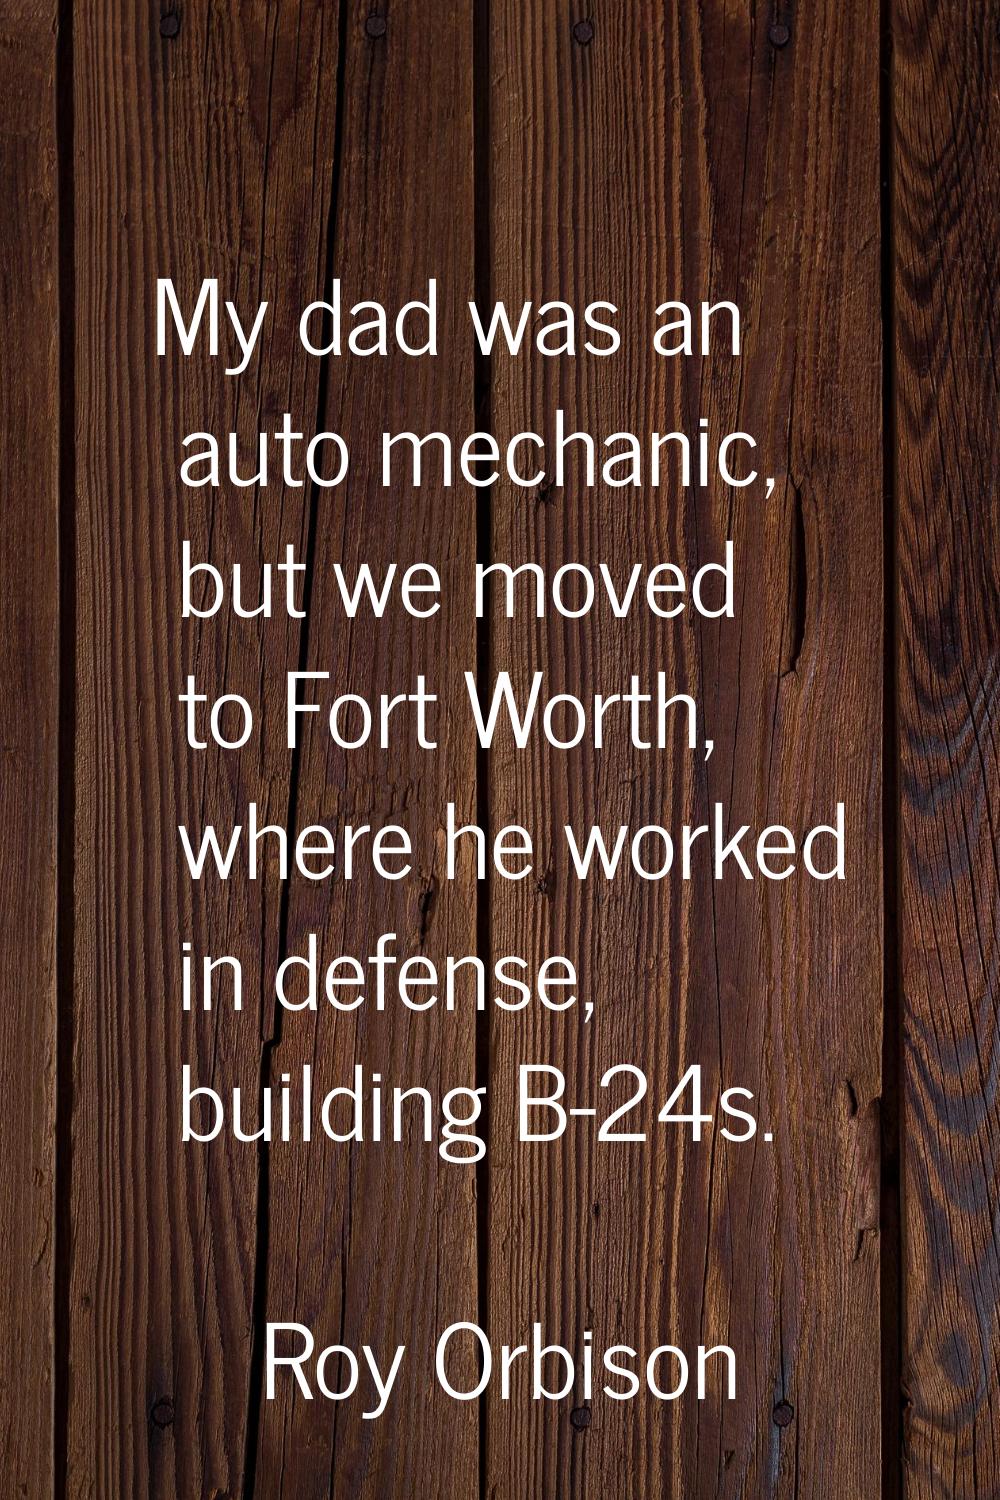 My dad was an auto mechanic, but we moved to Fort Worth, where he worked in defense, building B-24s